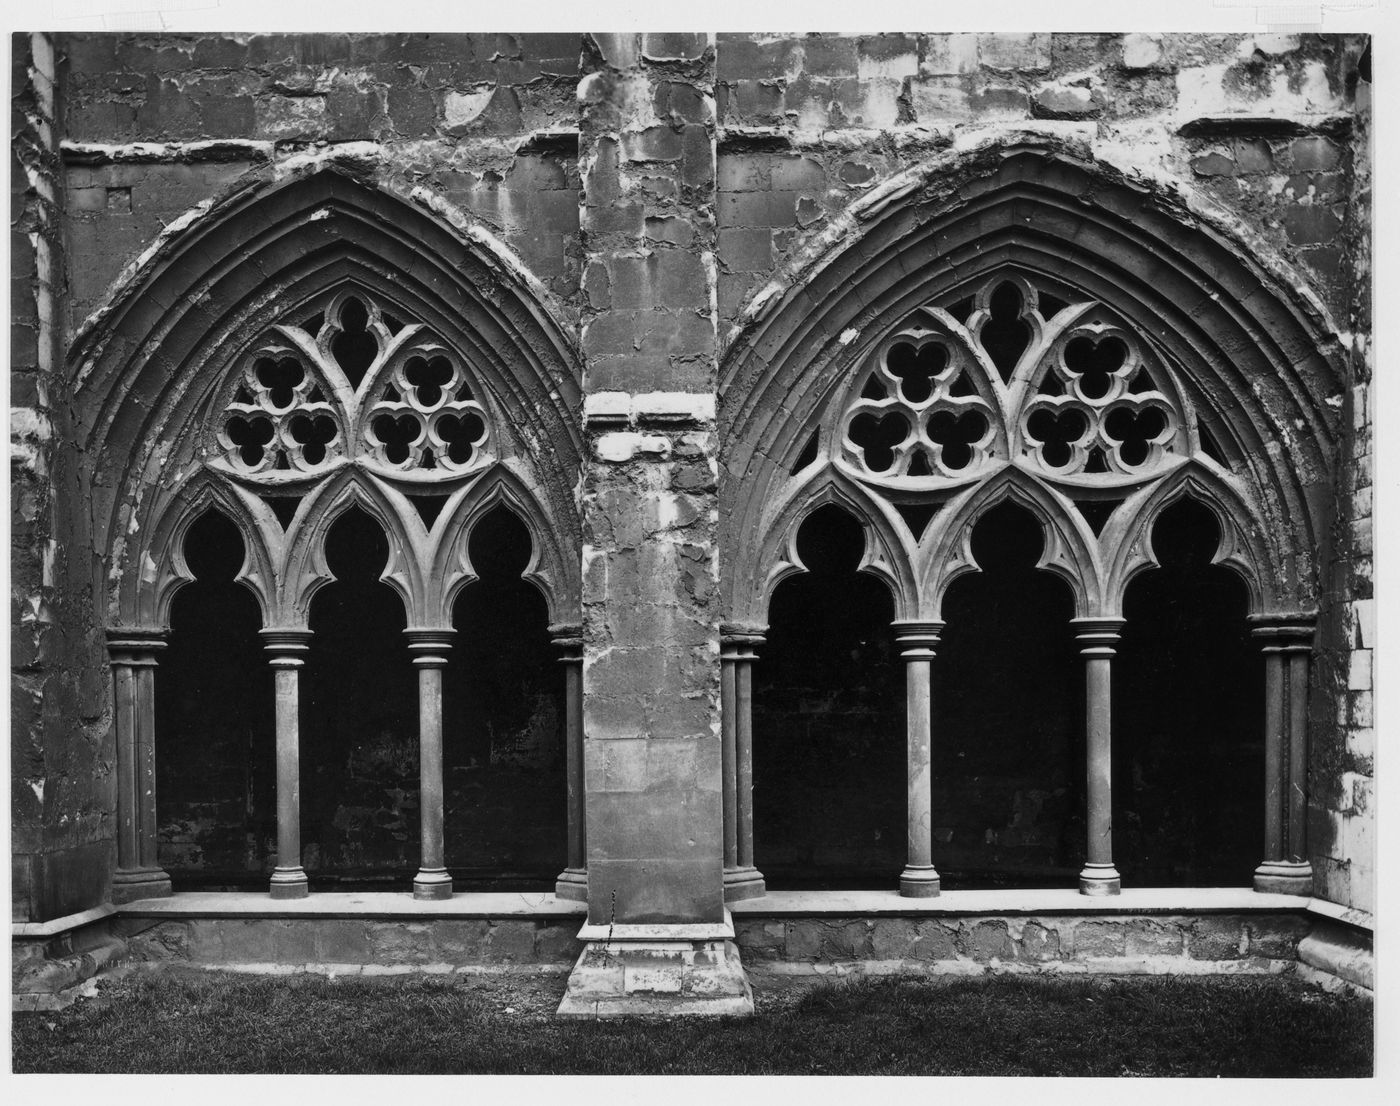 Detail of Cloister windows, Norwich Cathedral, Norwich, England